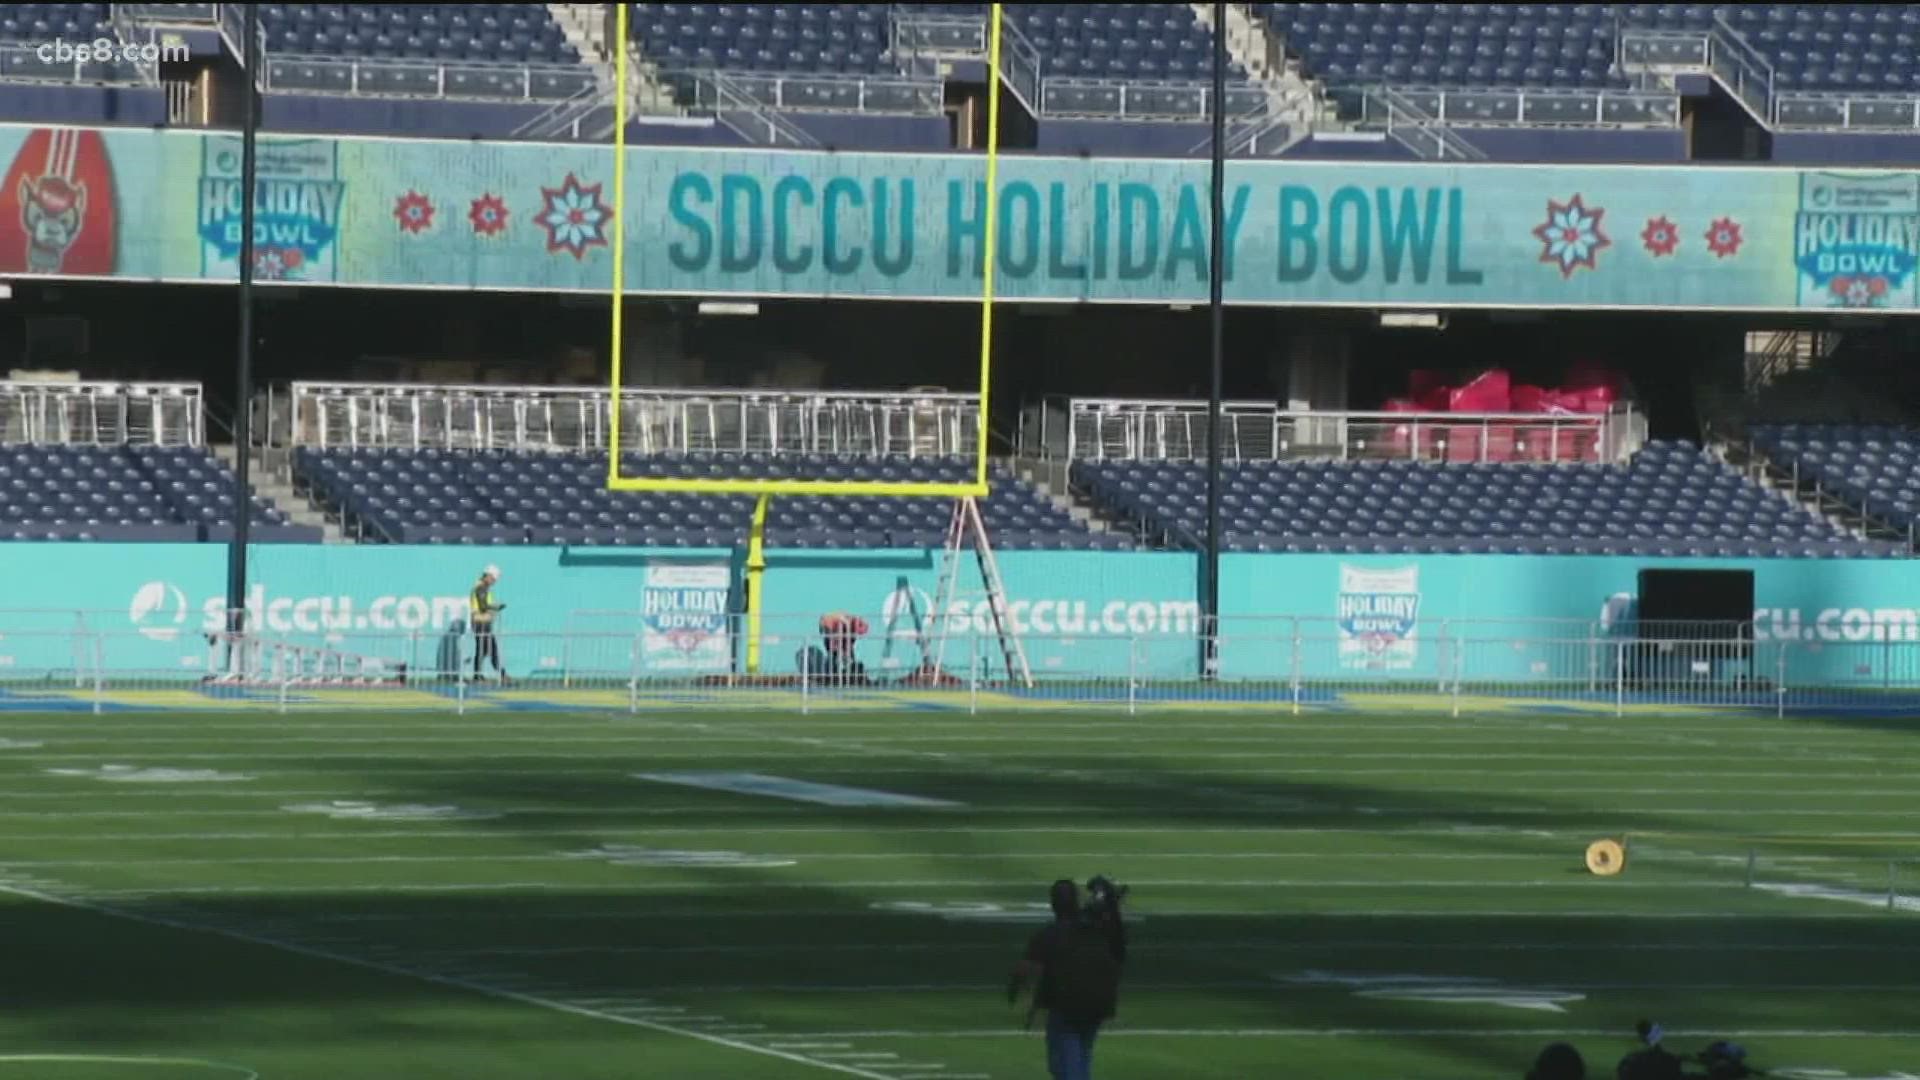 The UCLA football team said that they were unable to participate due to COVID-19 protocols. Holiday Bowl officials indicated the game could possibly be rescheduled